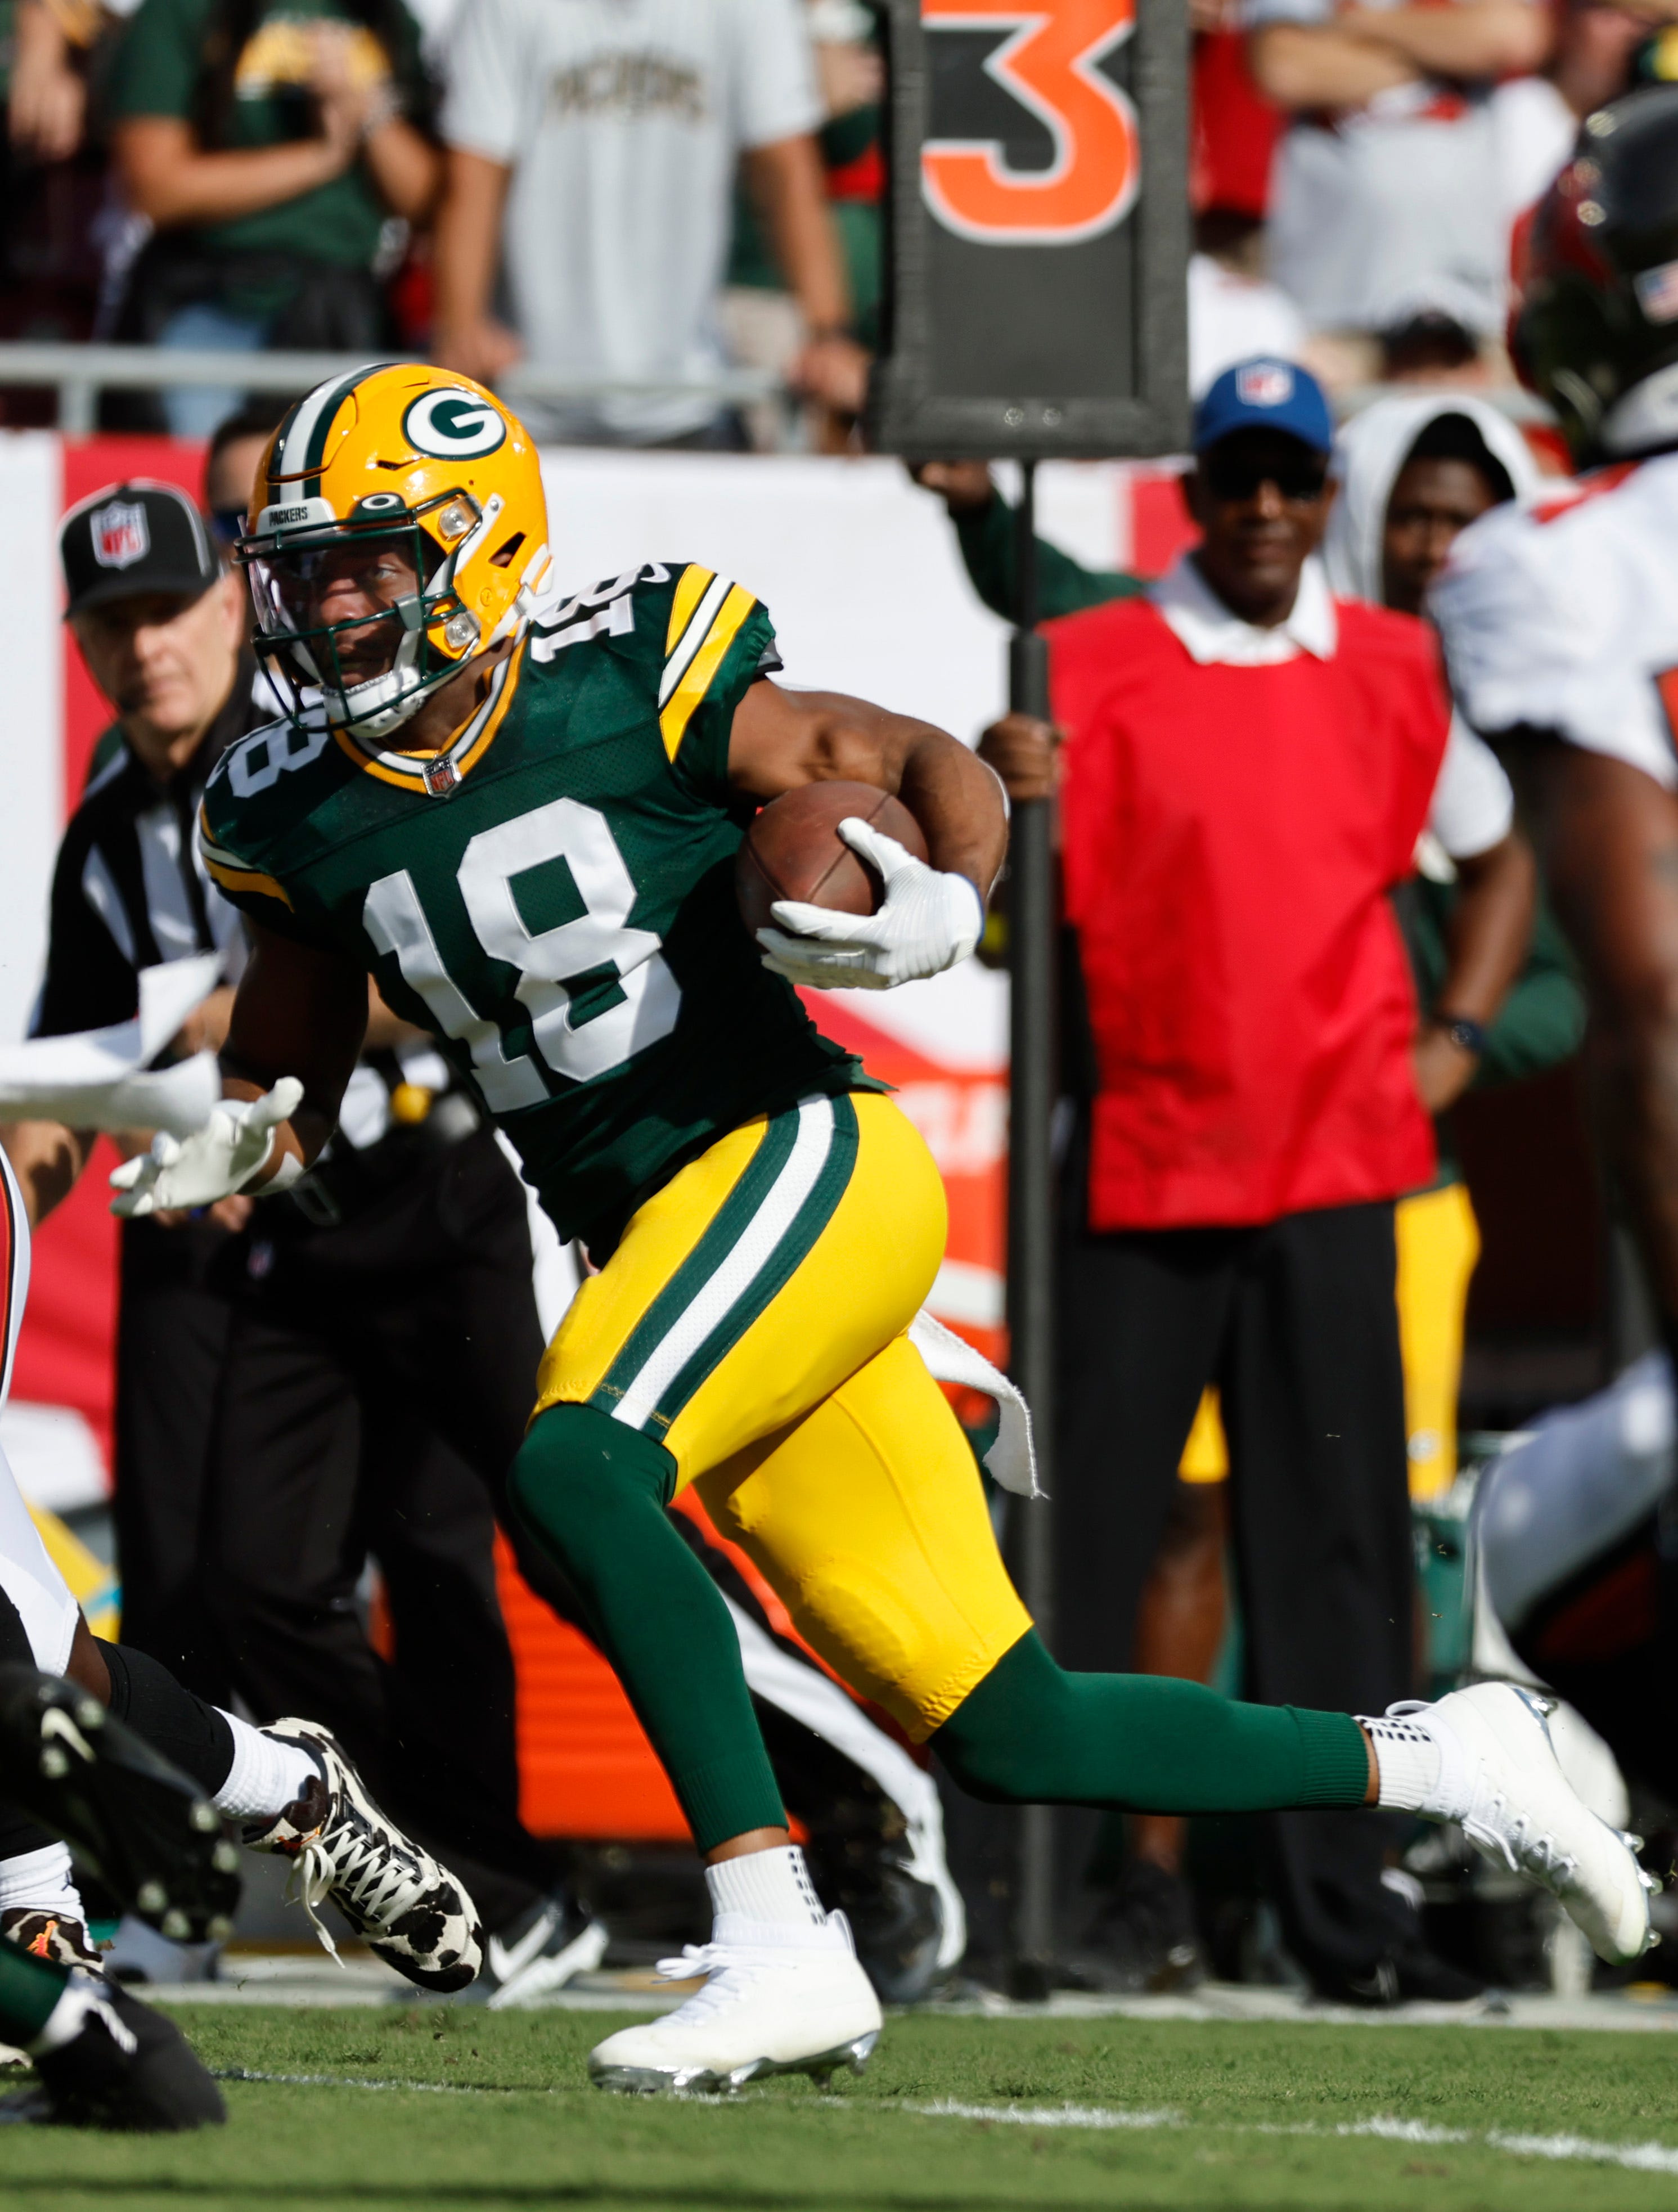 Green Bay Packers wide receiver Randall Cobb (18) had two catches for 57 yards in the first half, including a 40-yard reception, against the Tampa Bay Buccaneers on Sept. 25, 2022, at Raymond James Stadium in Tampa, Florida.